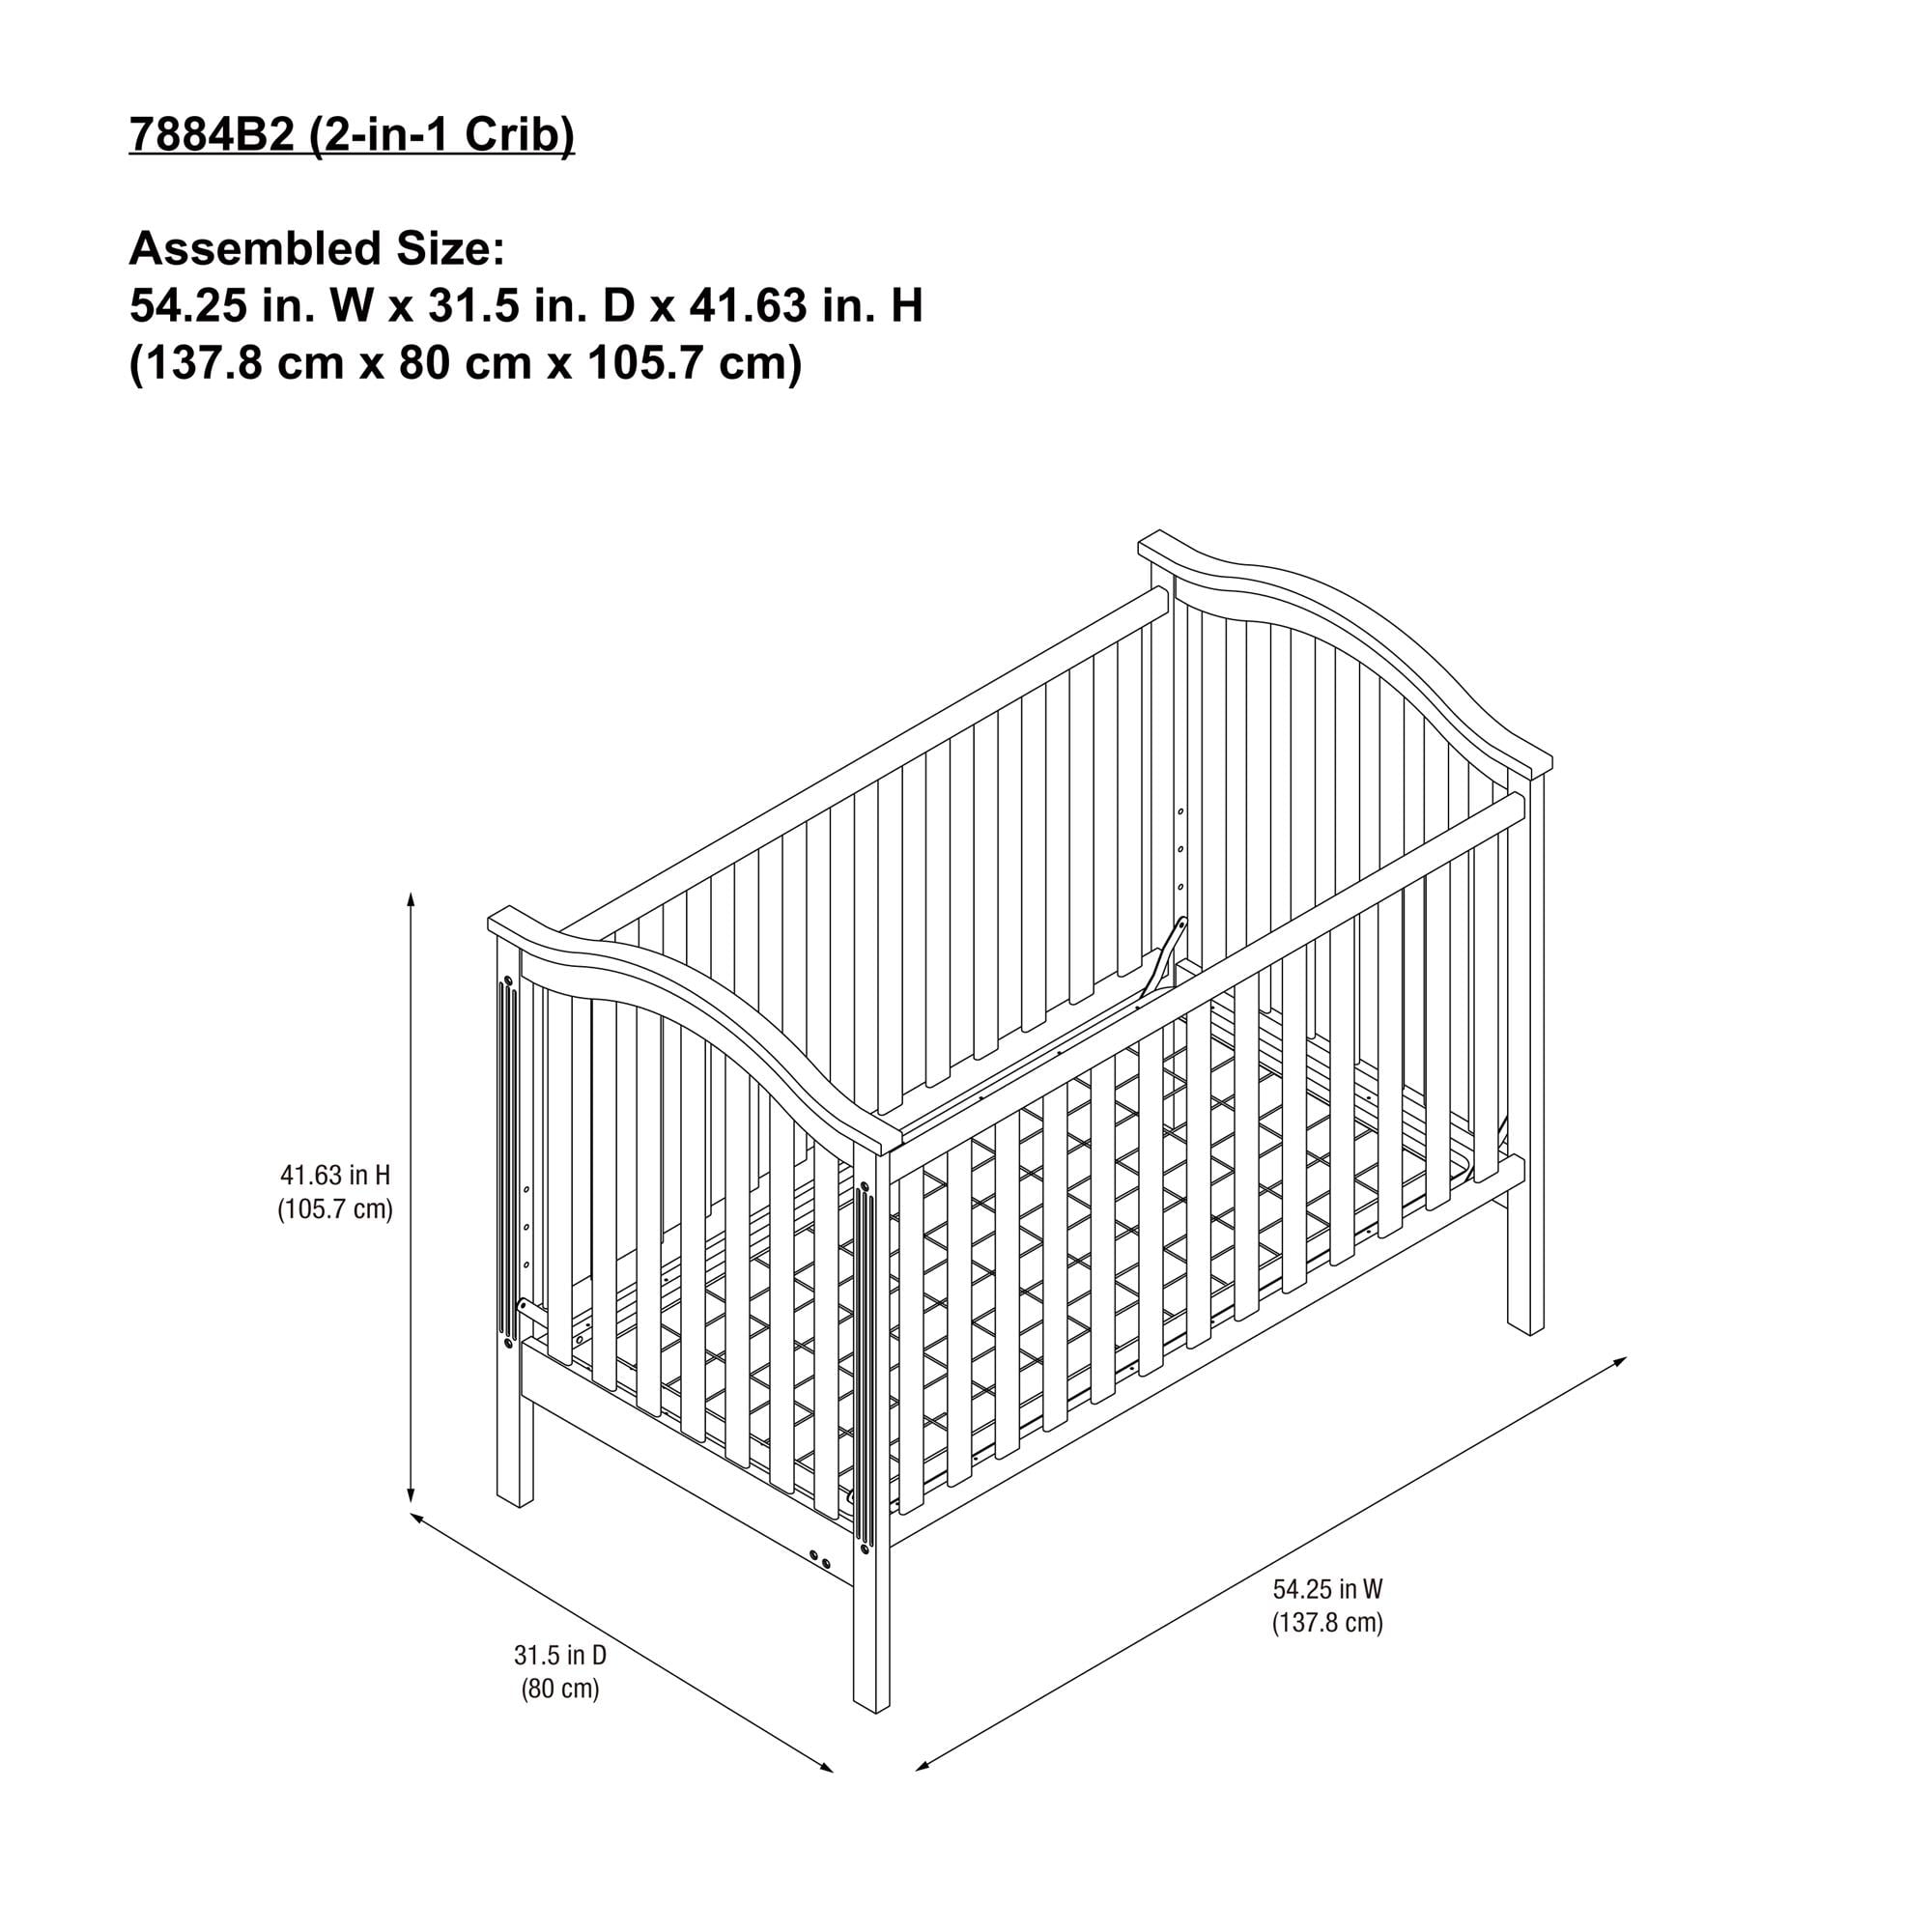 standard crib size in inches